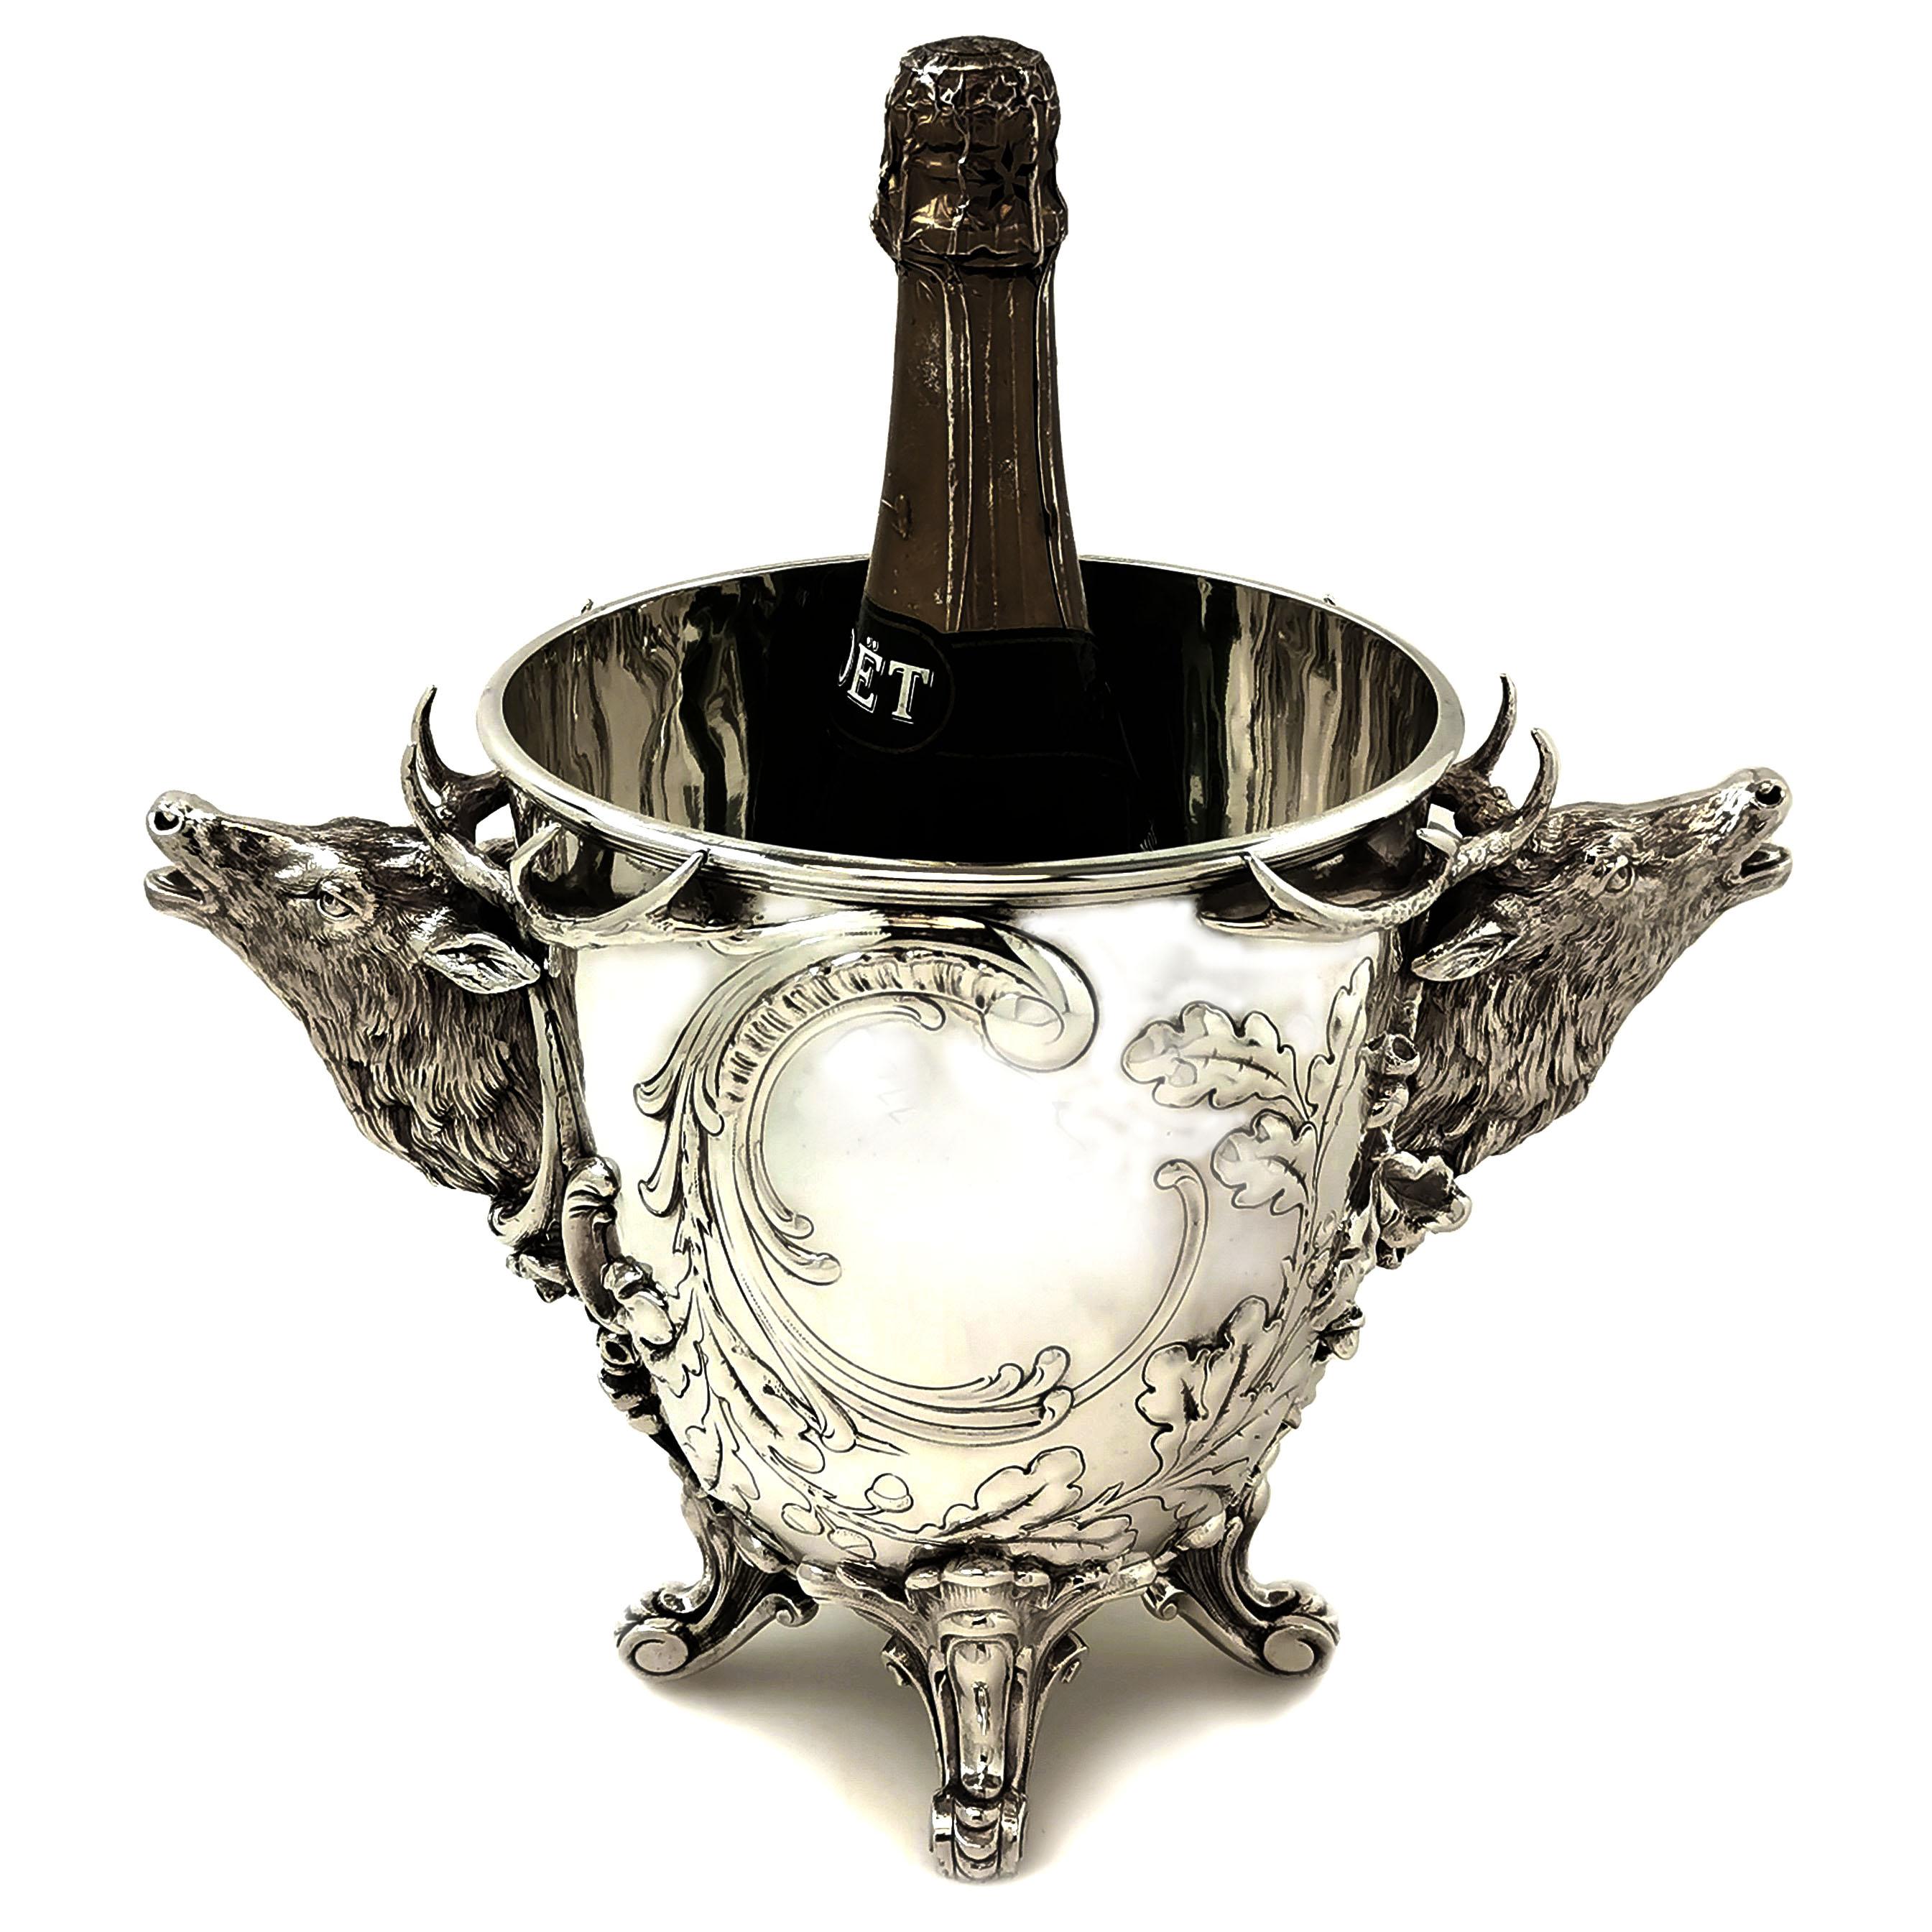 An impressive antique German solid silver wine cooler / Ice bucket featuring a pair of magnificent silver stag handles. The ice bucket stands on four scroll feet and the body of the cooler is embellished with chased oak leaf and scroll designs. The